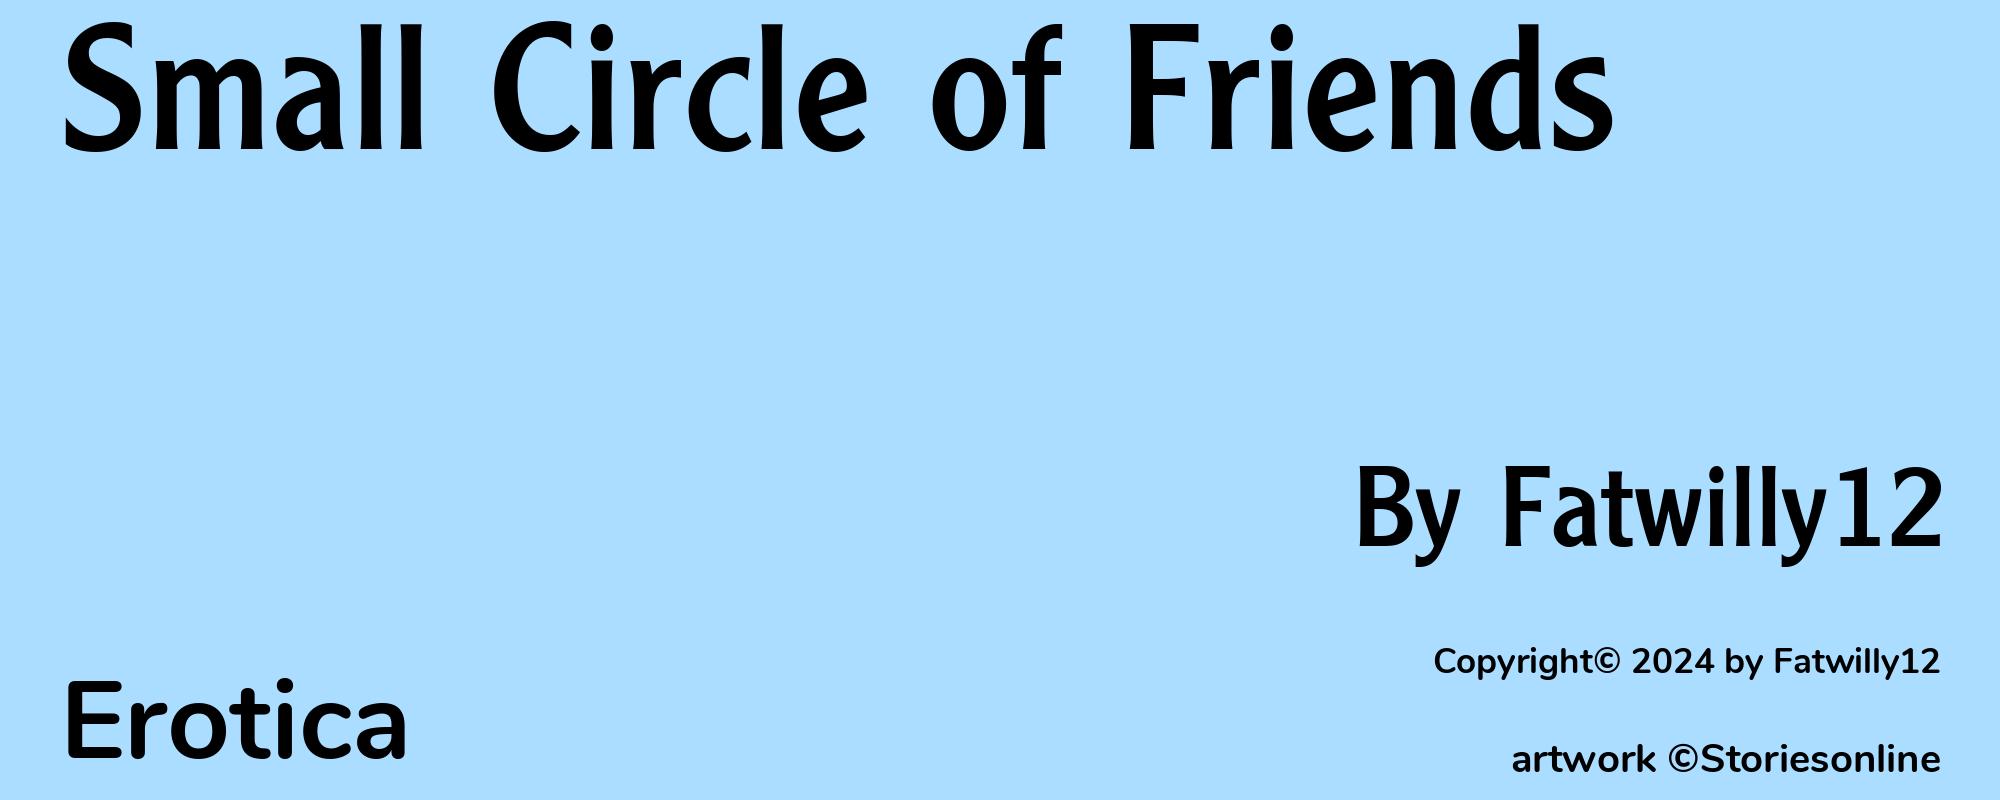 Small Circle of Friends - Cover